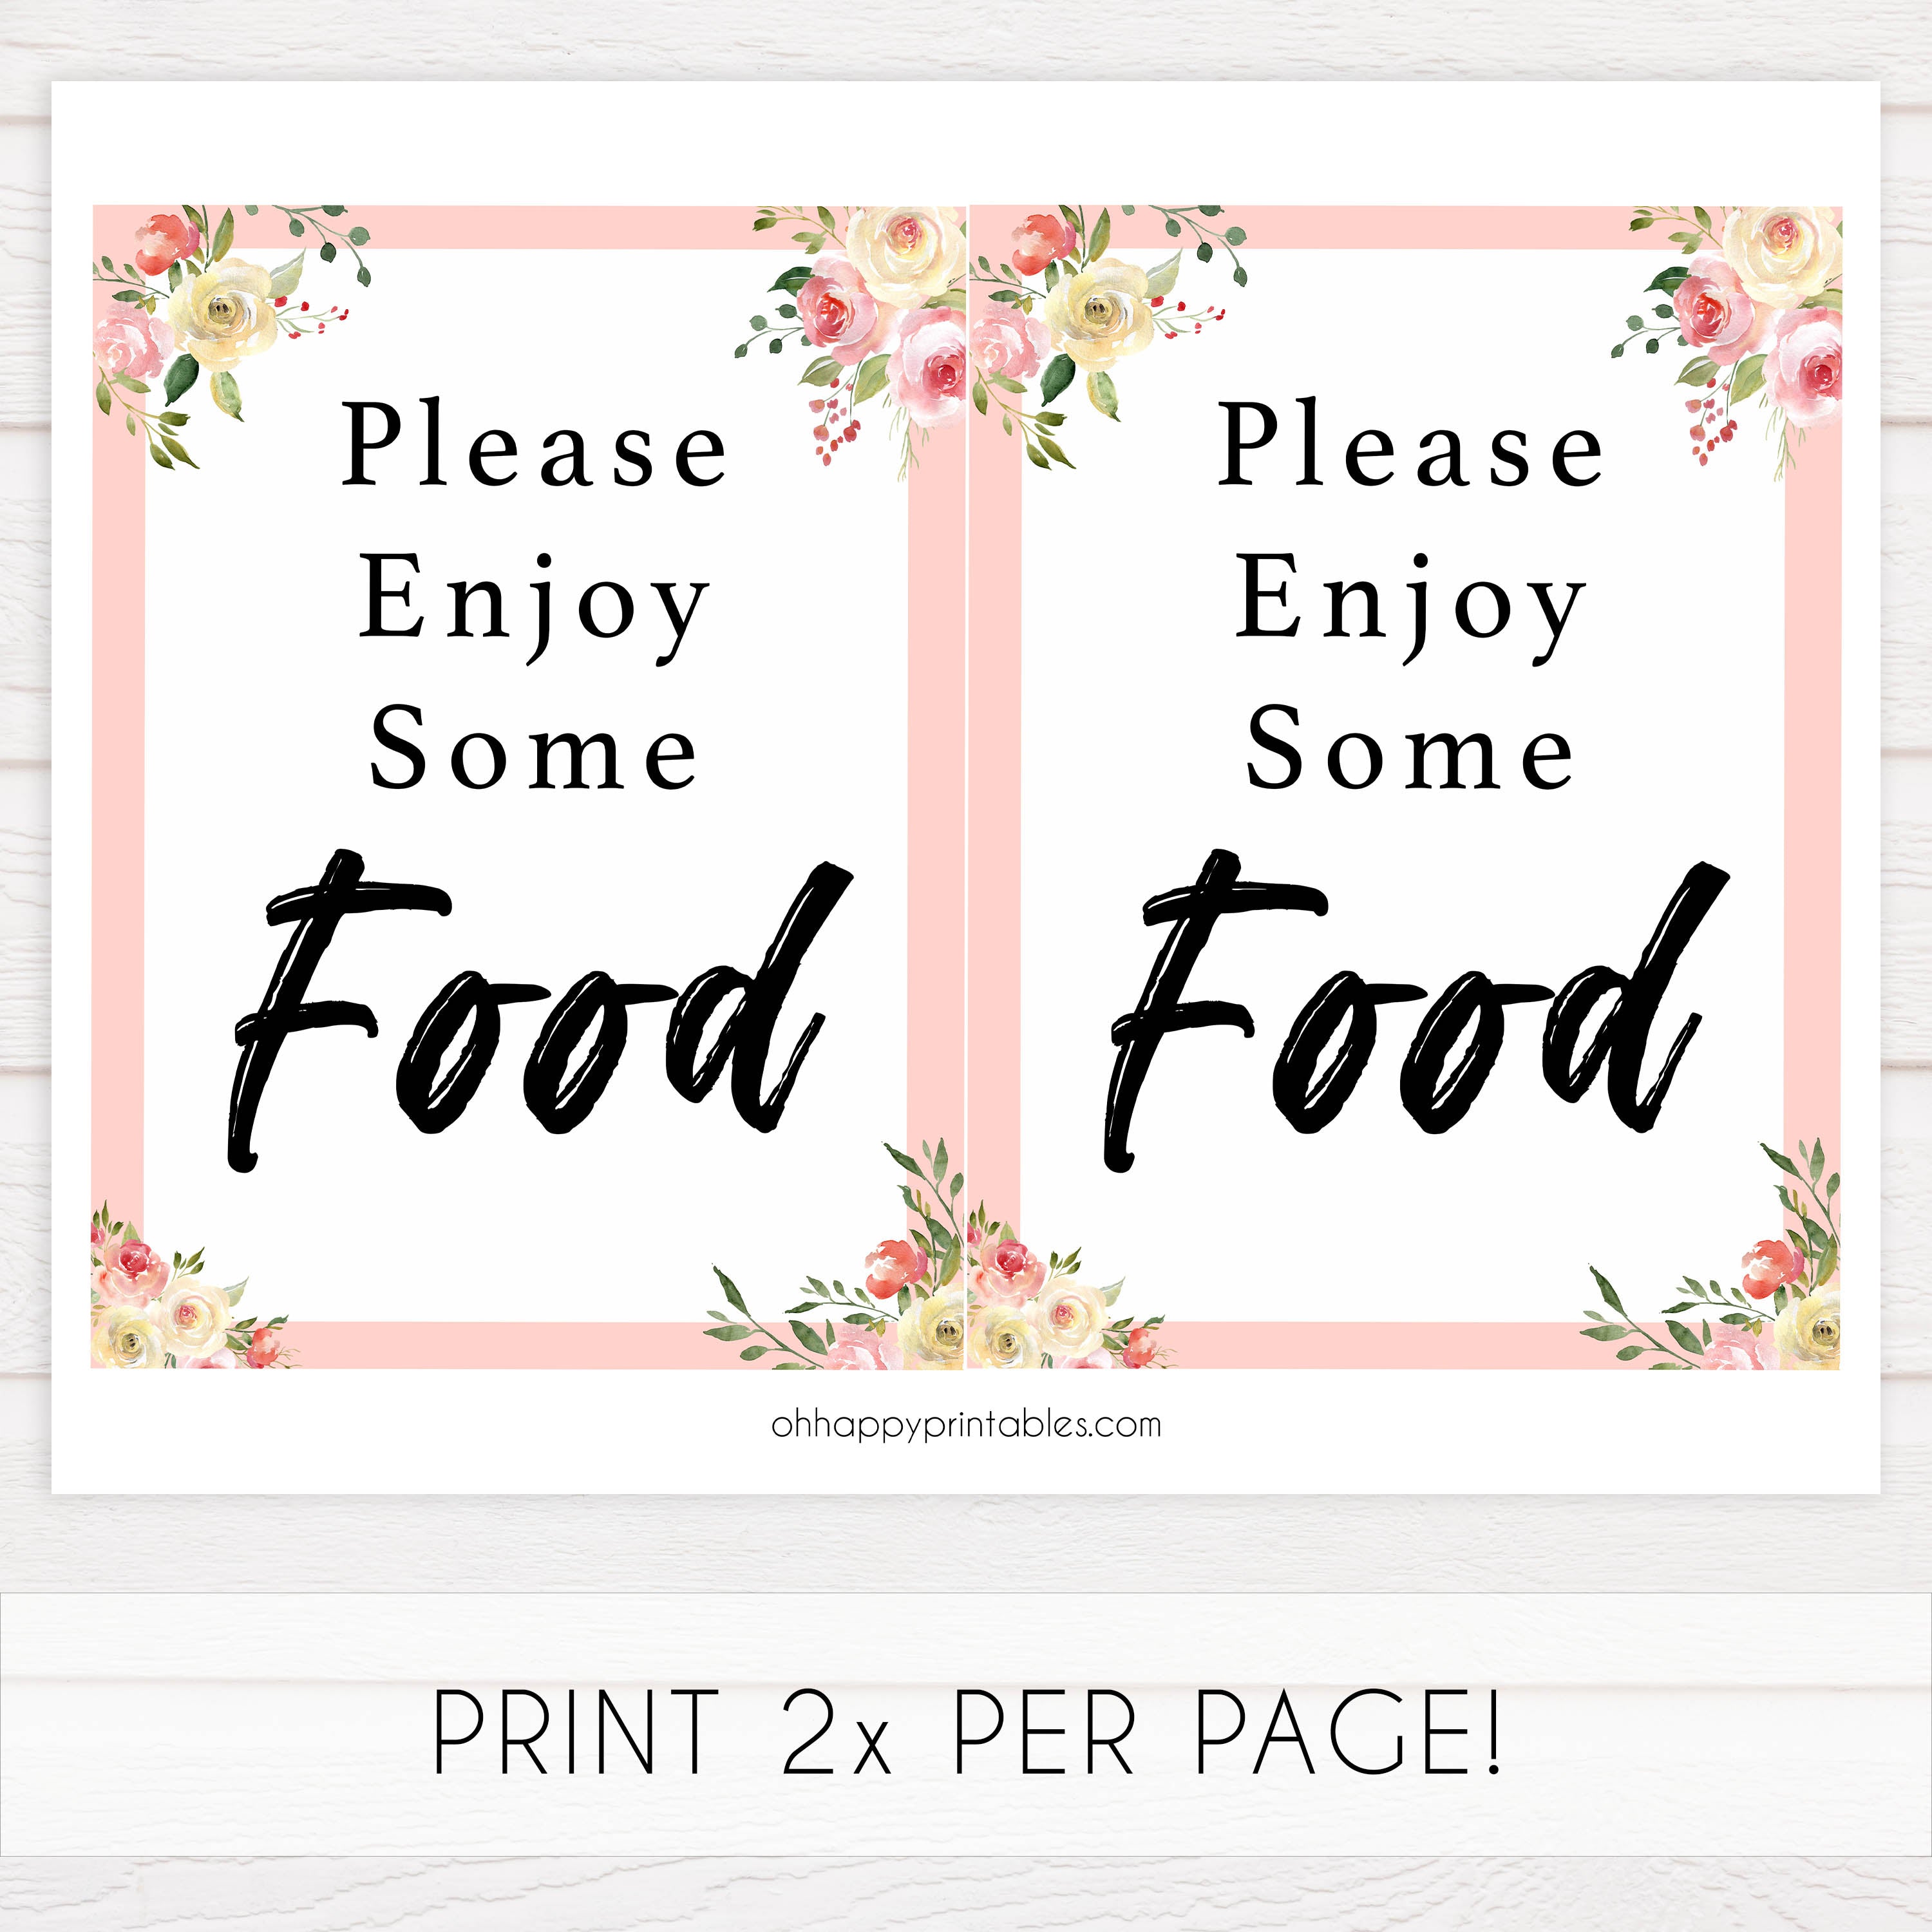 Food baby signs, food baby table decor, Spring floral baby decor, printable baby table signs, printable baby decor, floral table signs, fun baby signs, fun baby table signs